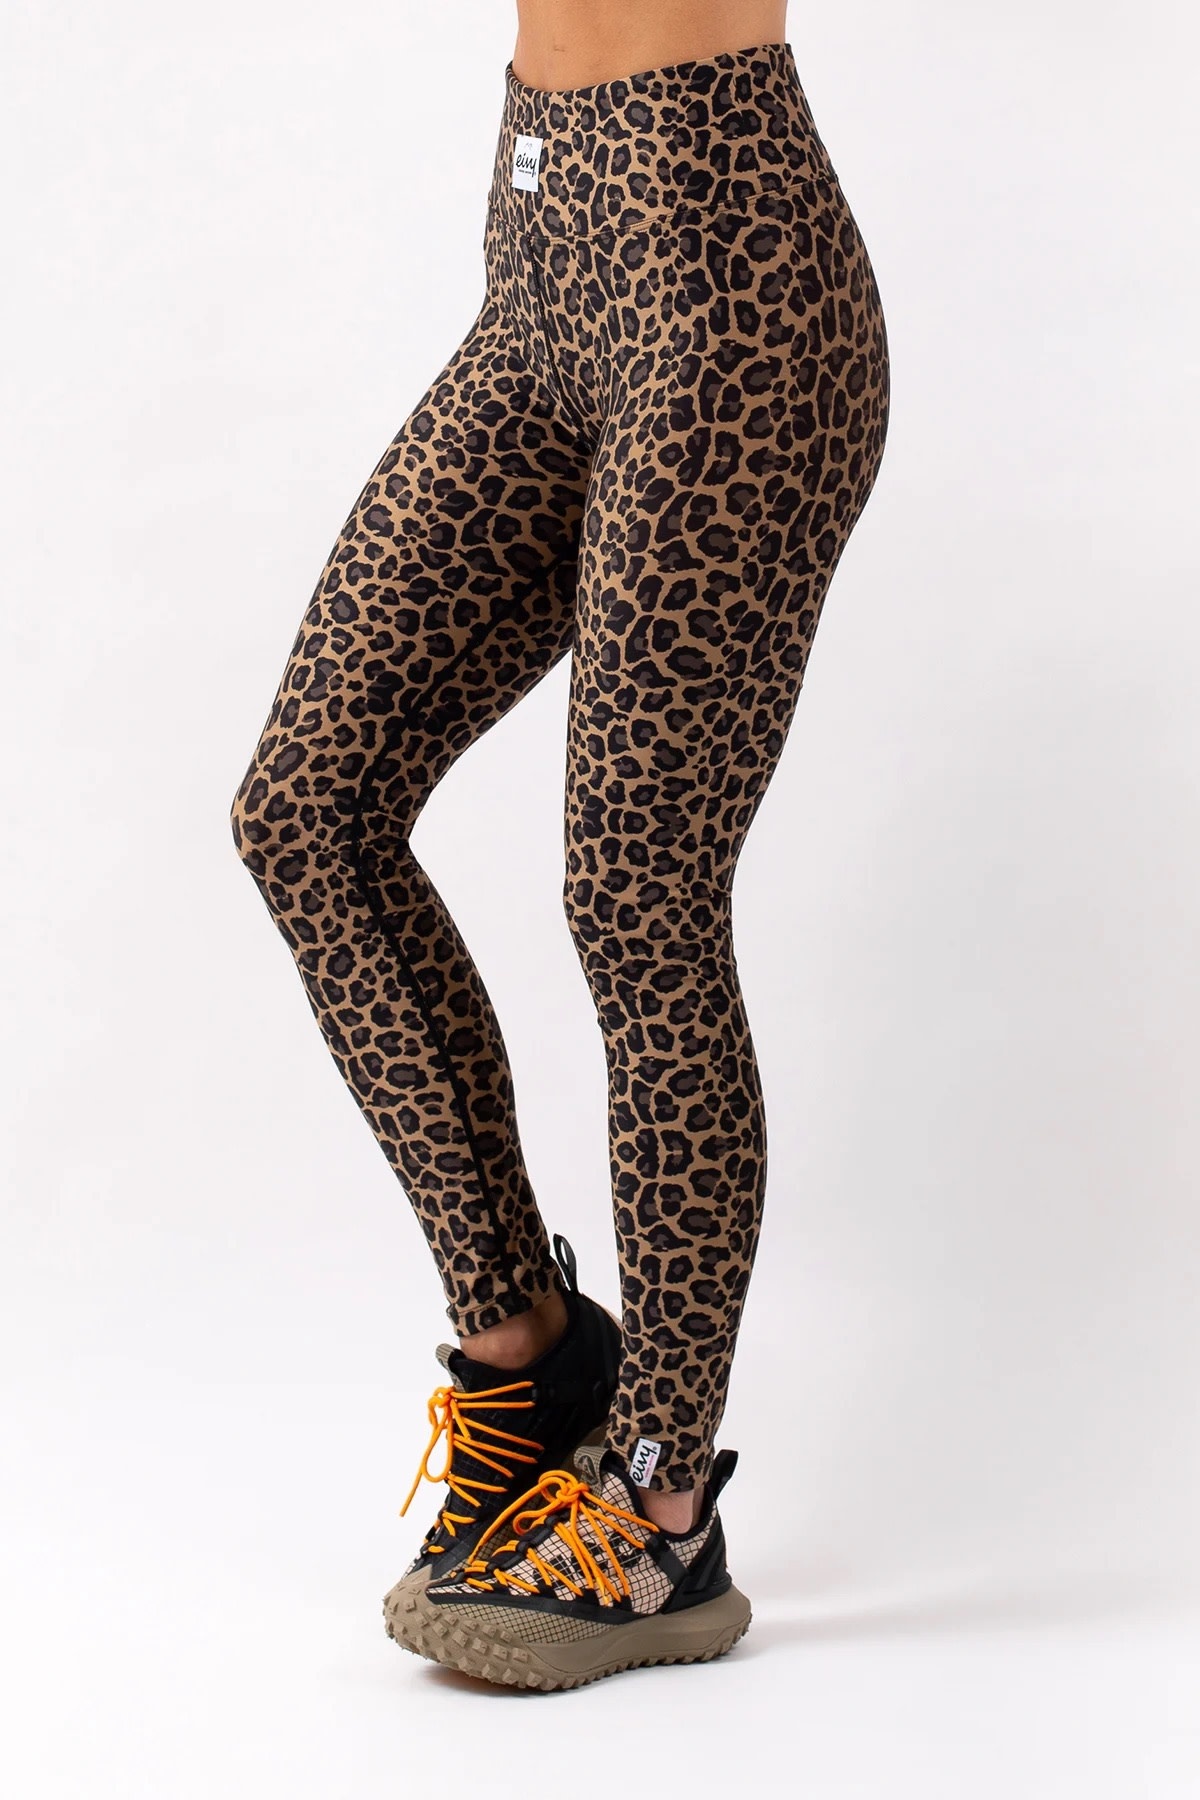 Eivy Icecold Tights (23/24) Leopard